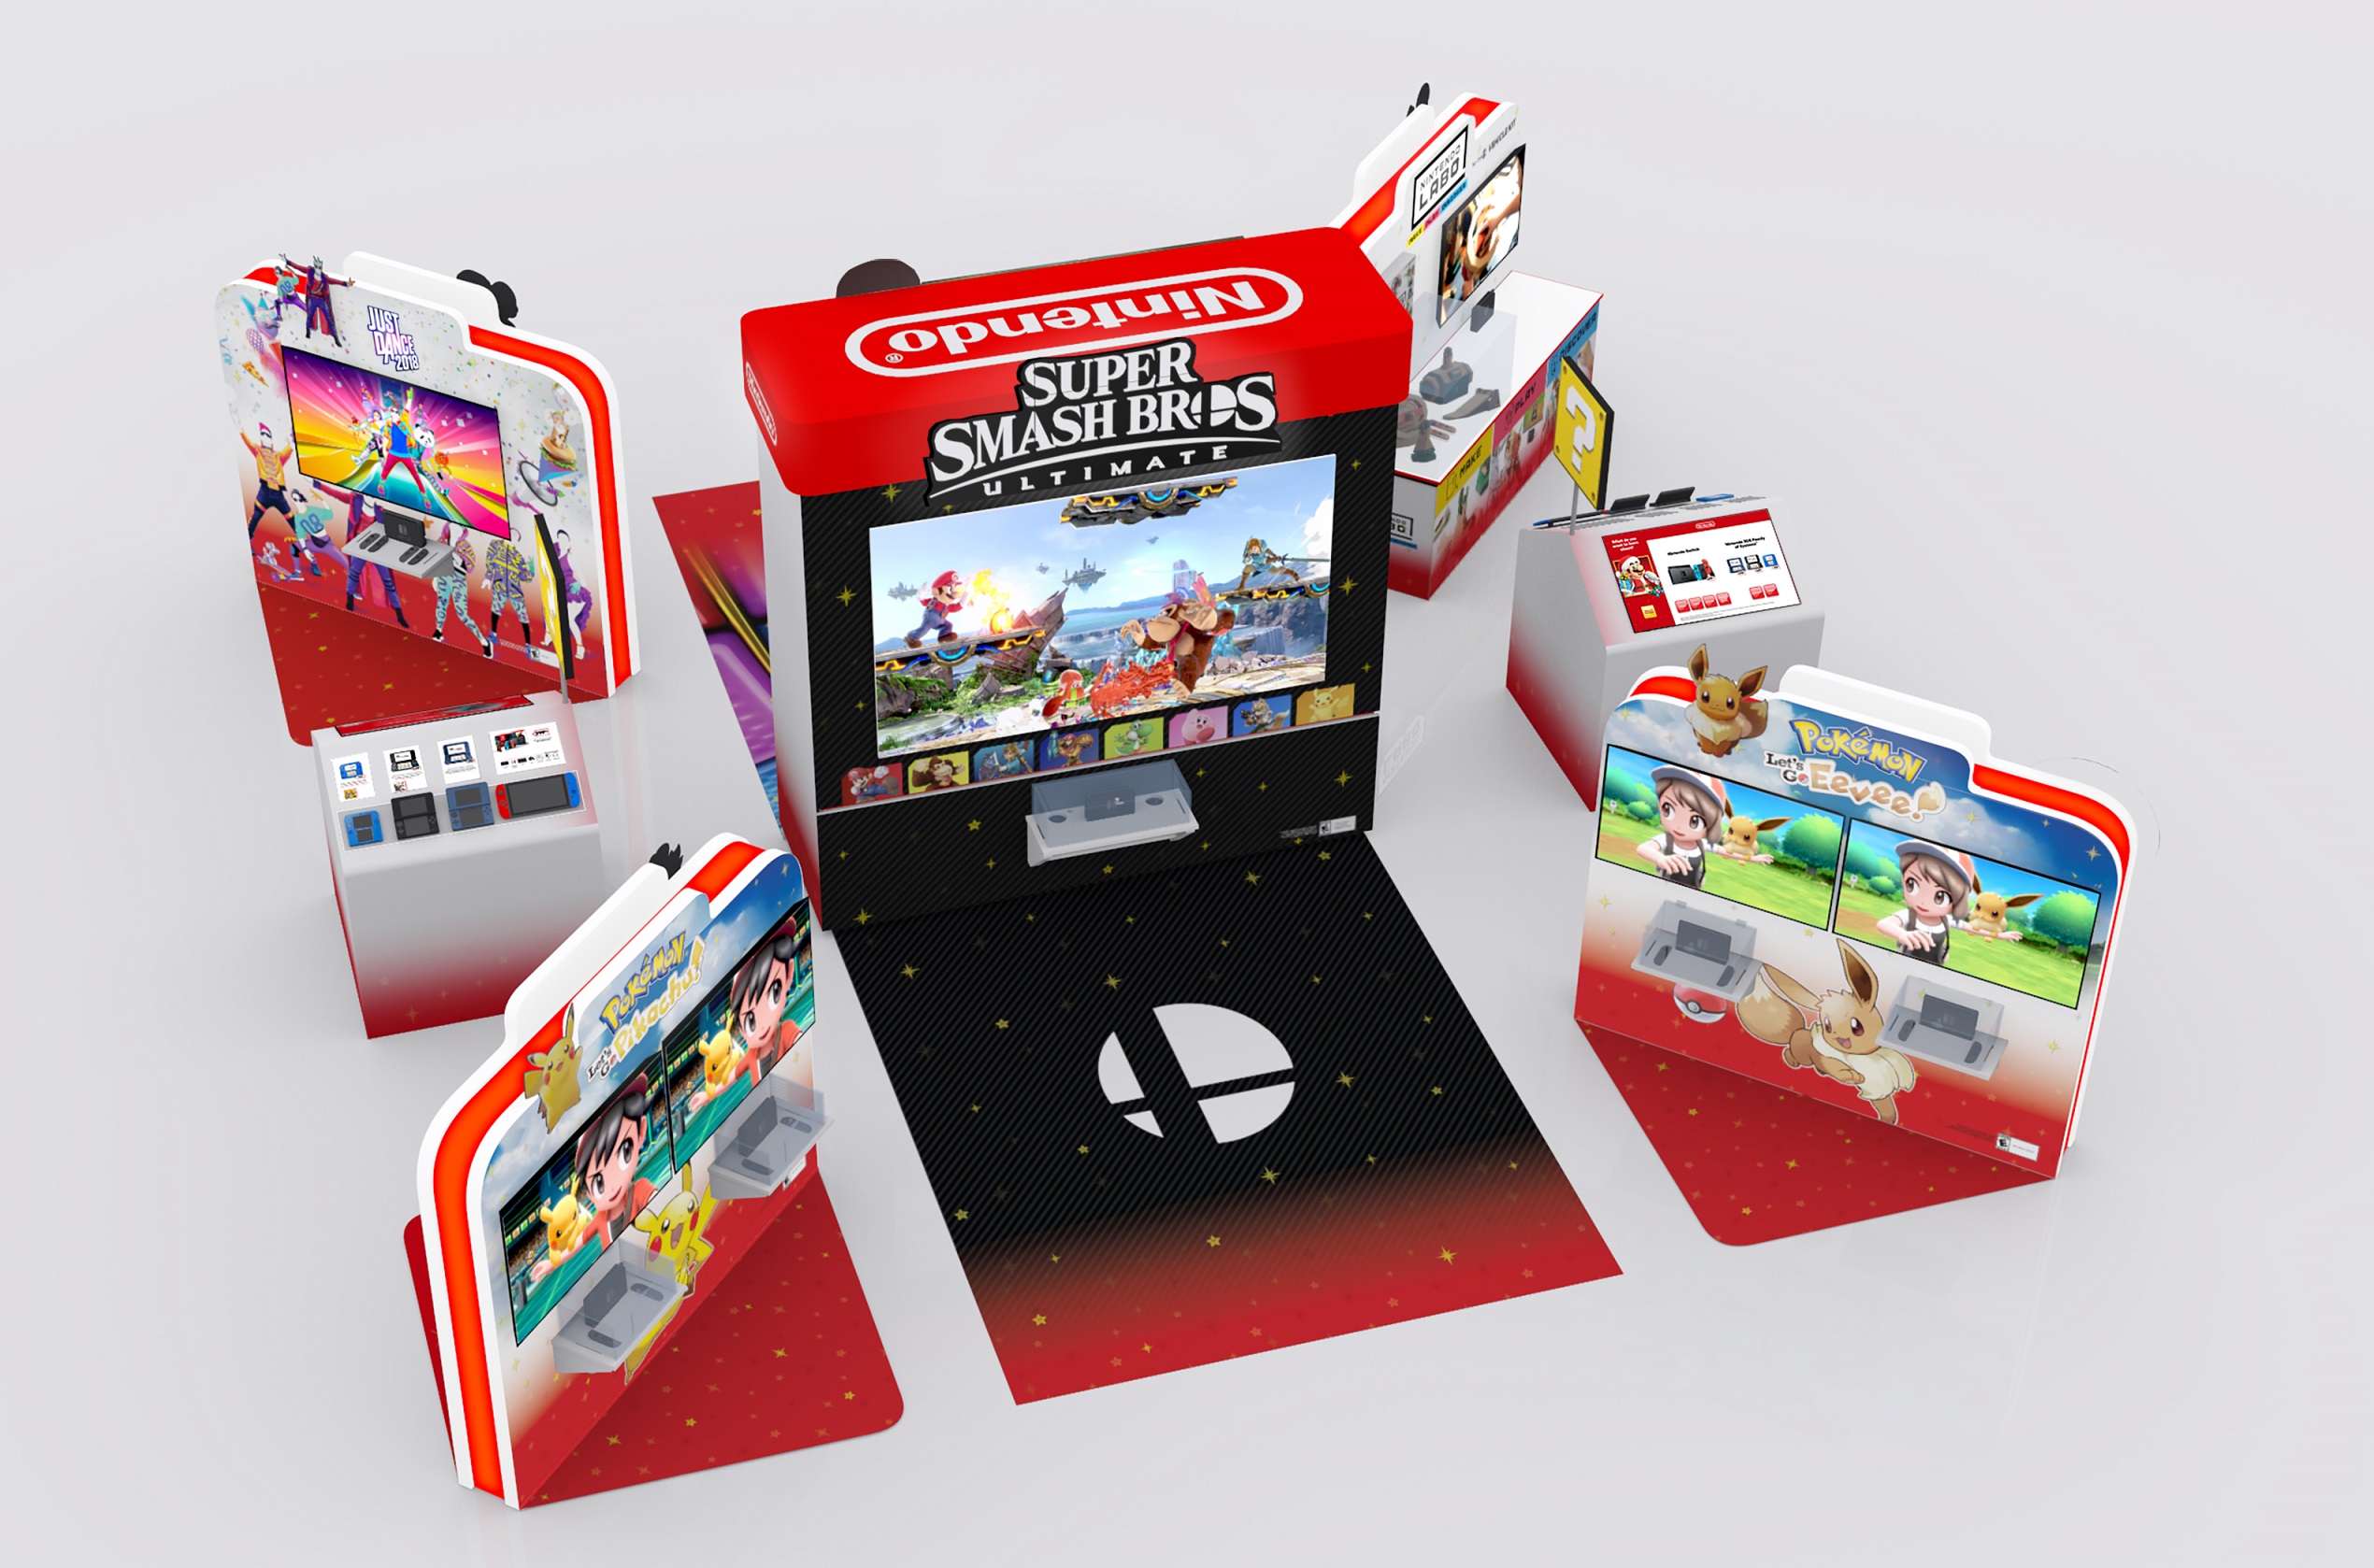 Noa Pr Take Holiday Shopping To The Next Level At The Nintendo Switch Holiday Experience The